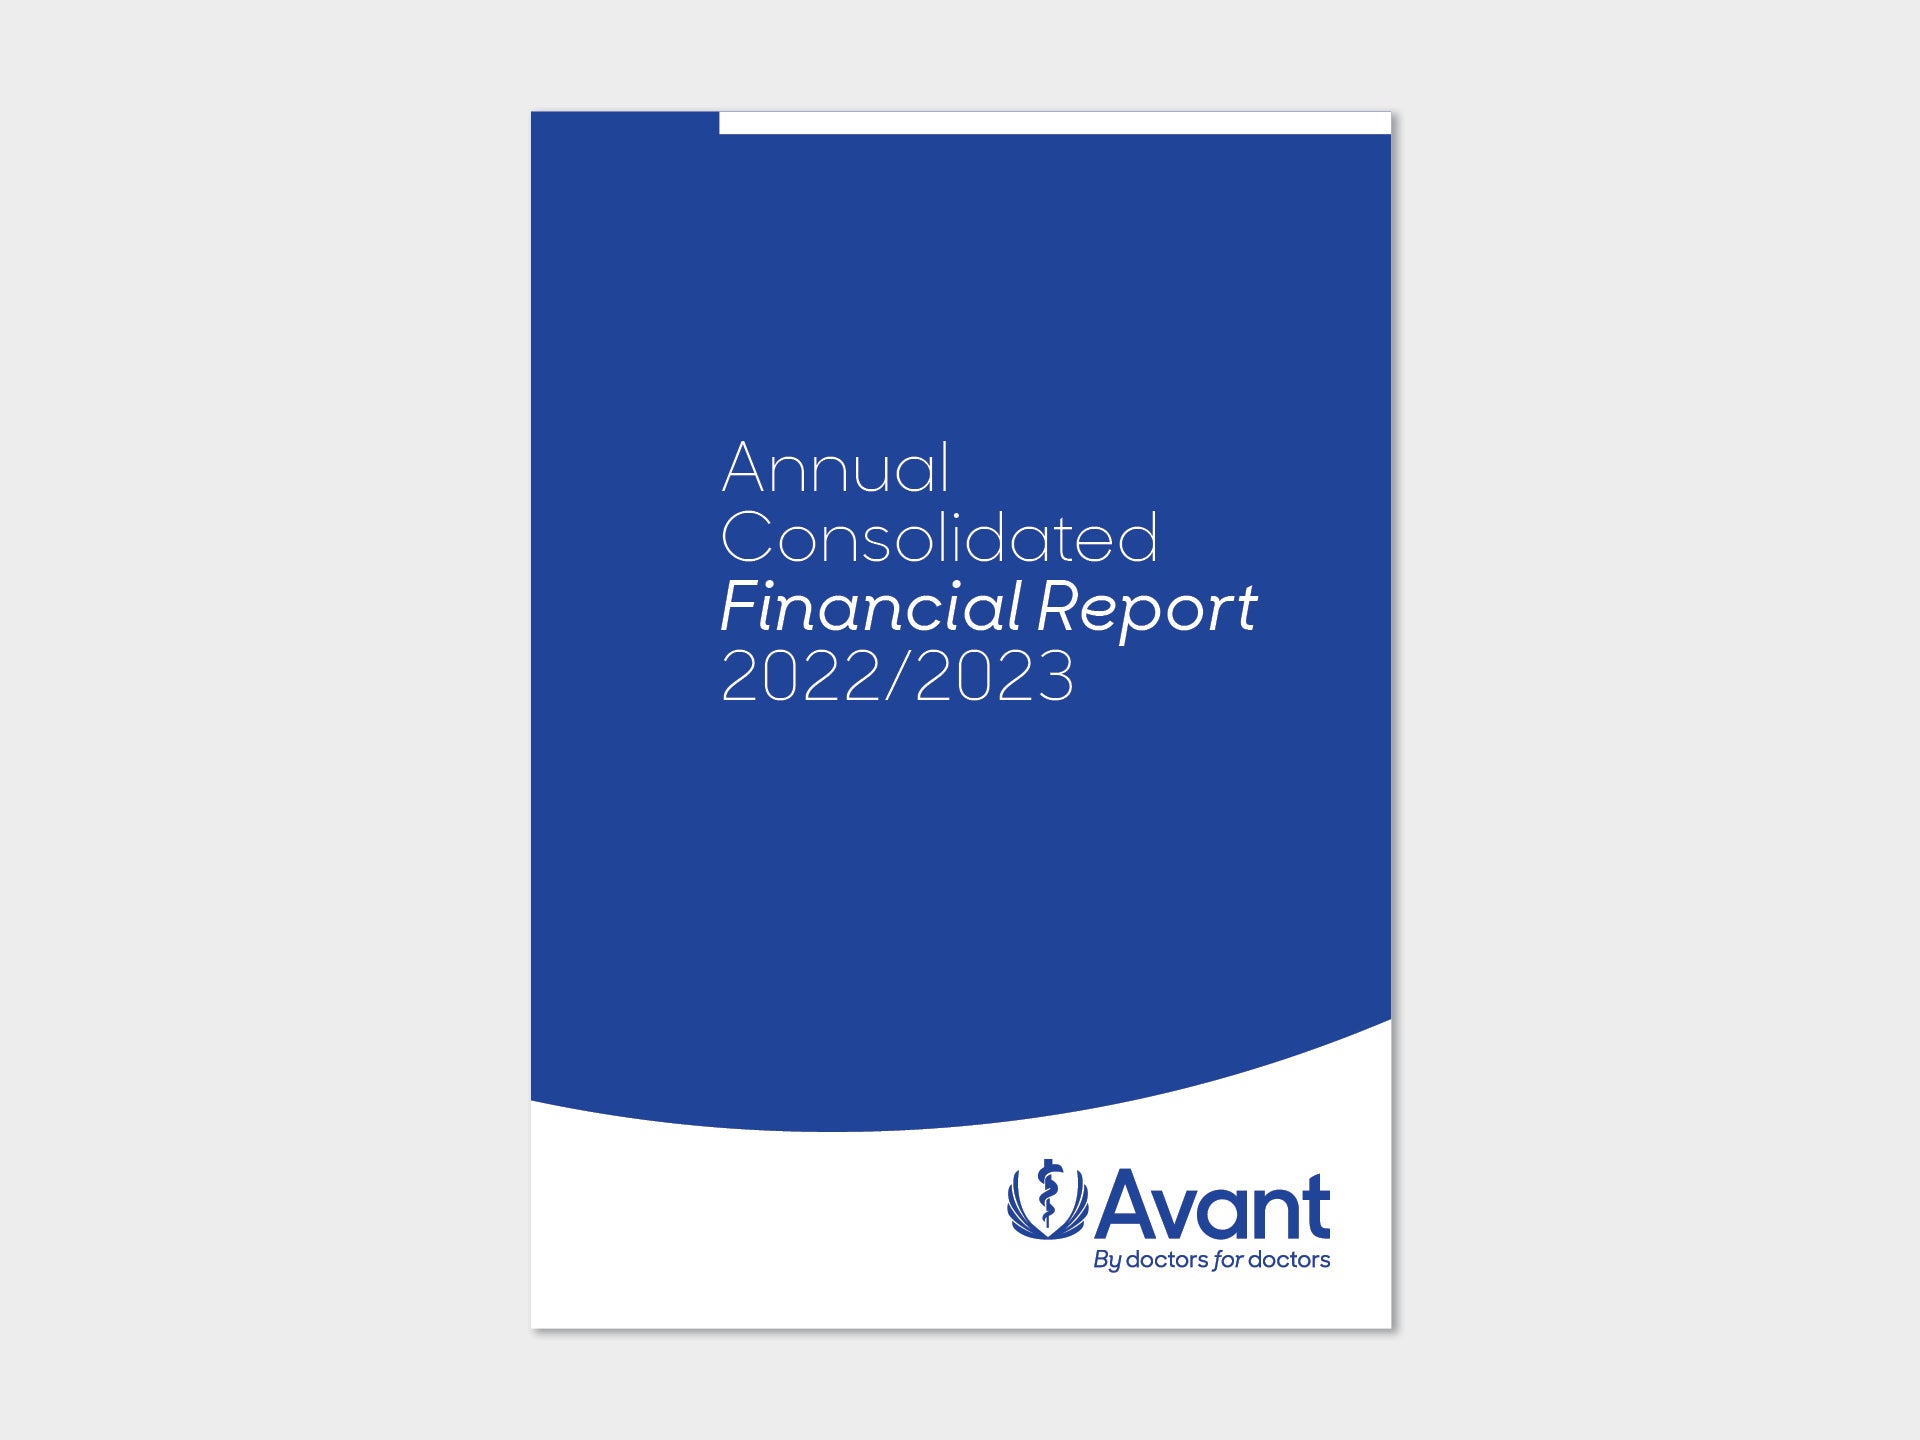 Annual Consolidated Financial Report 2022/2023